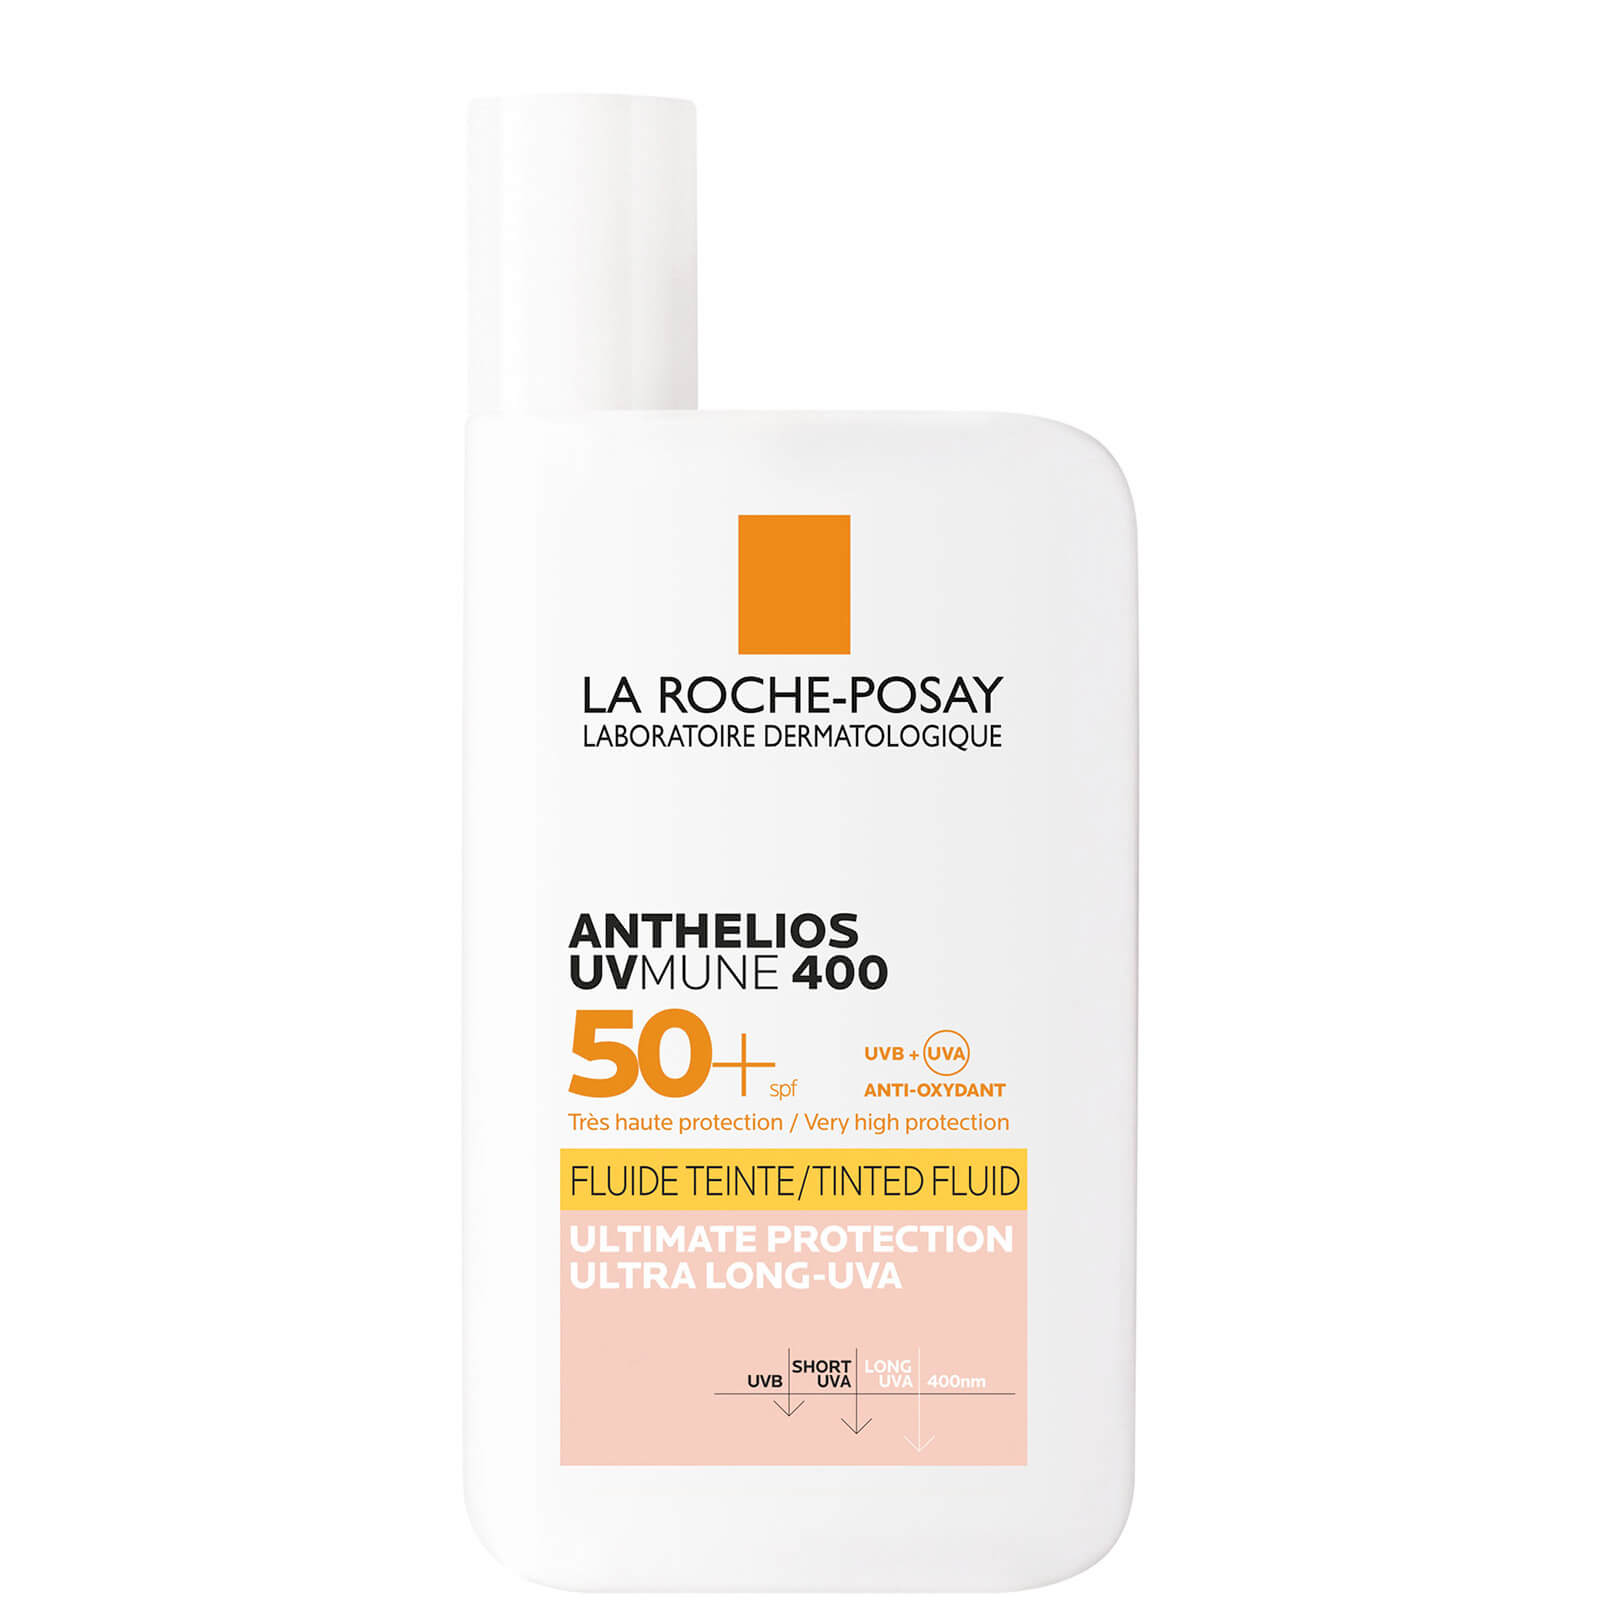 La Roche-Posay Anthelios UVMune 400 Invisible Fluid Tinted SPF50+ 50ml product